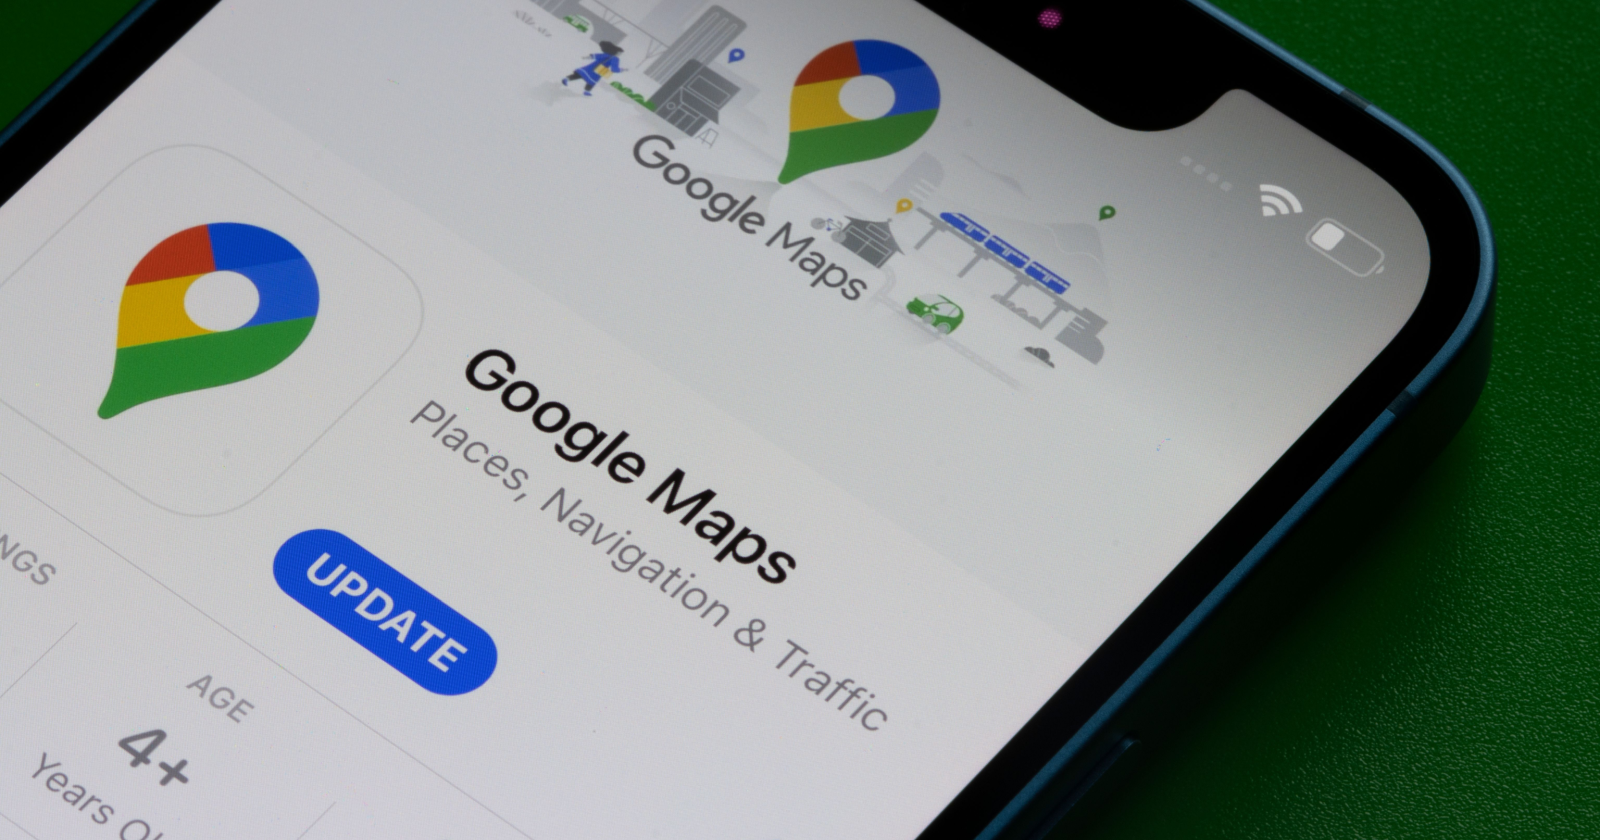 Google Maps brings a new level of interactivity to your journey